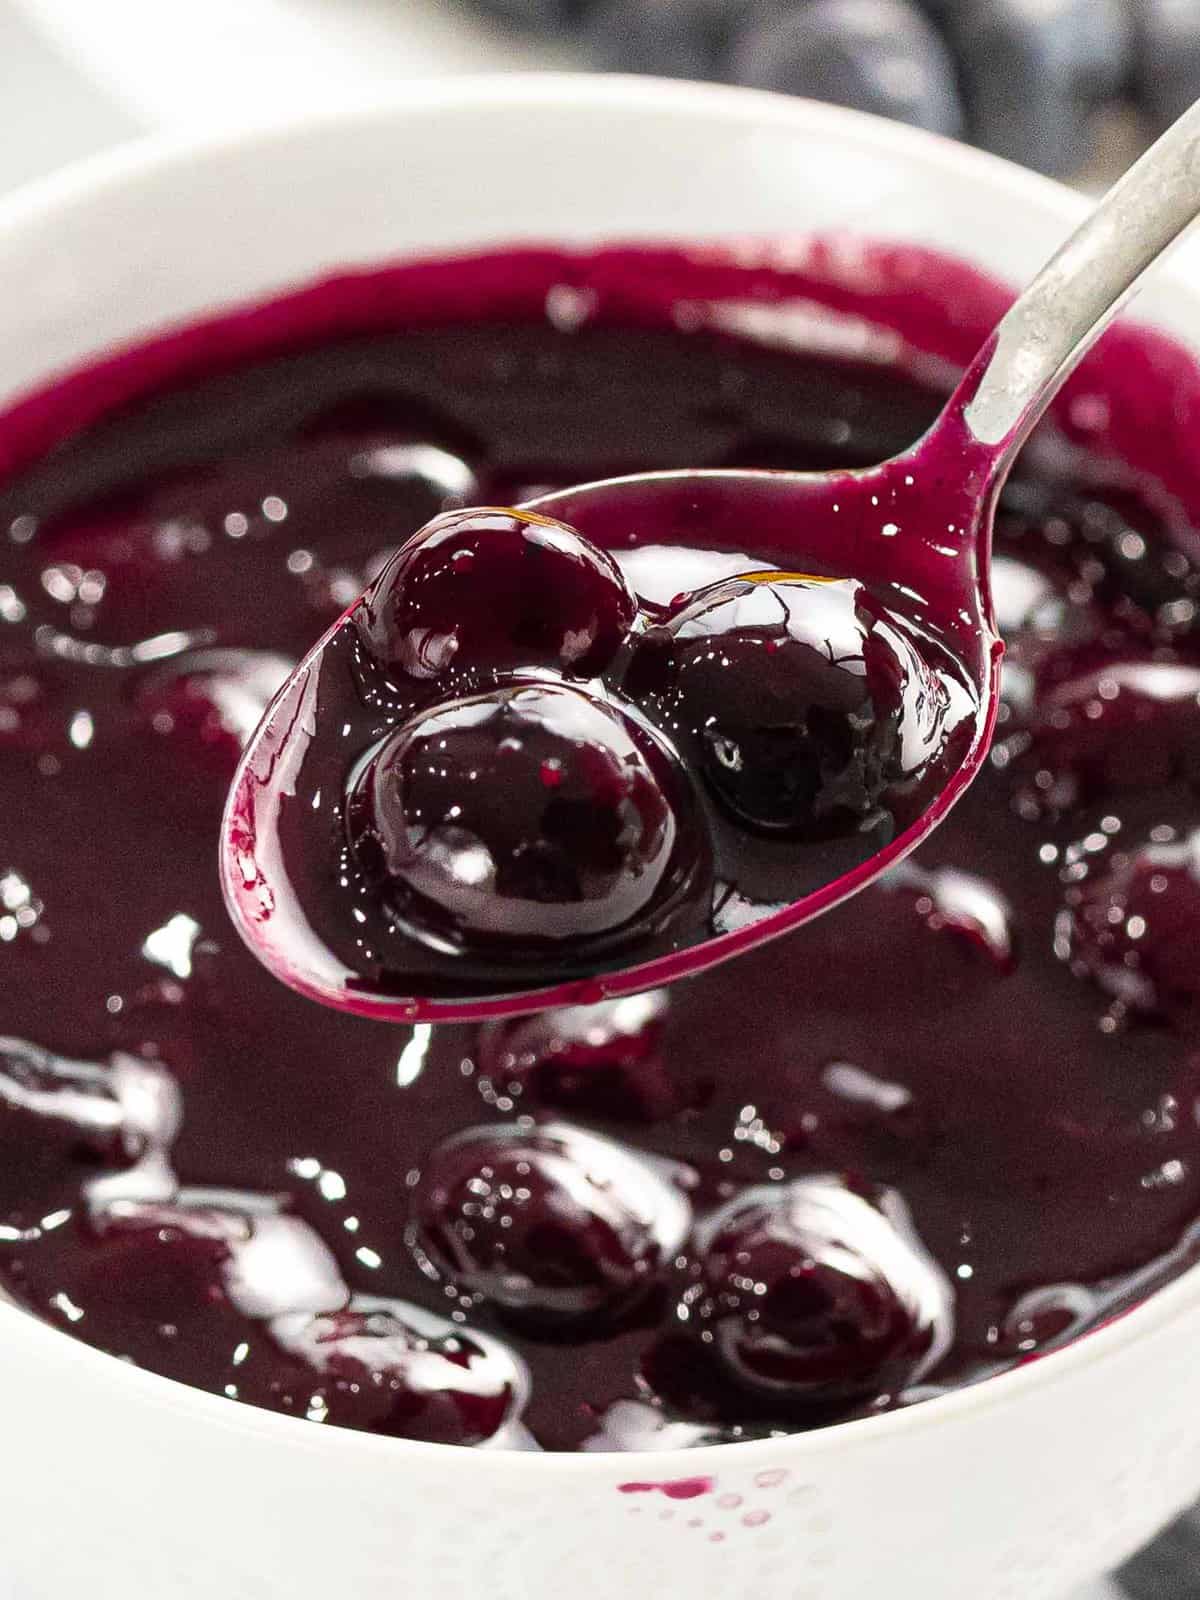 Blueberry compote with pieces of blueberries on a spoon.